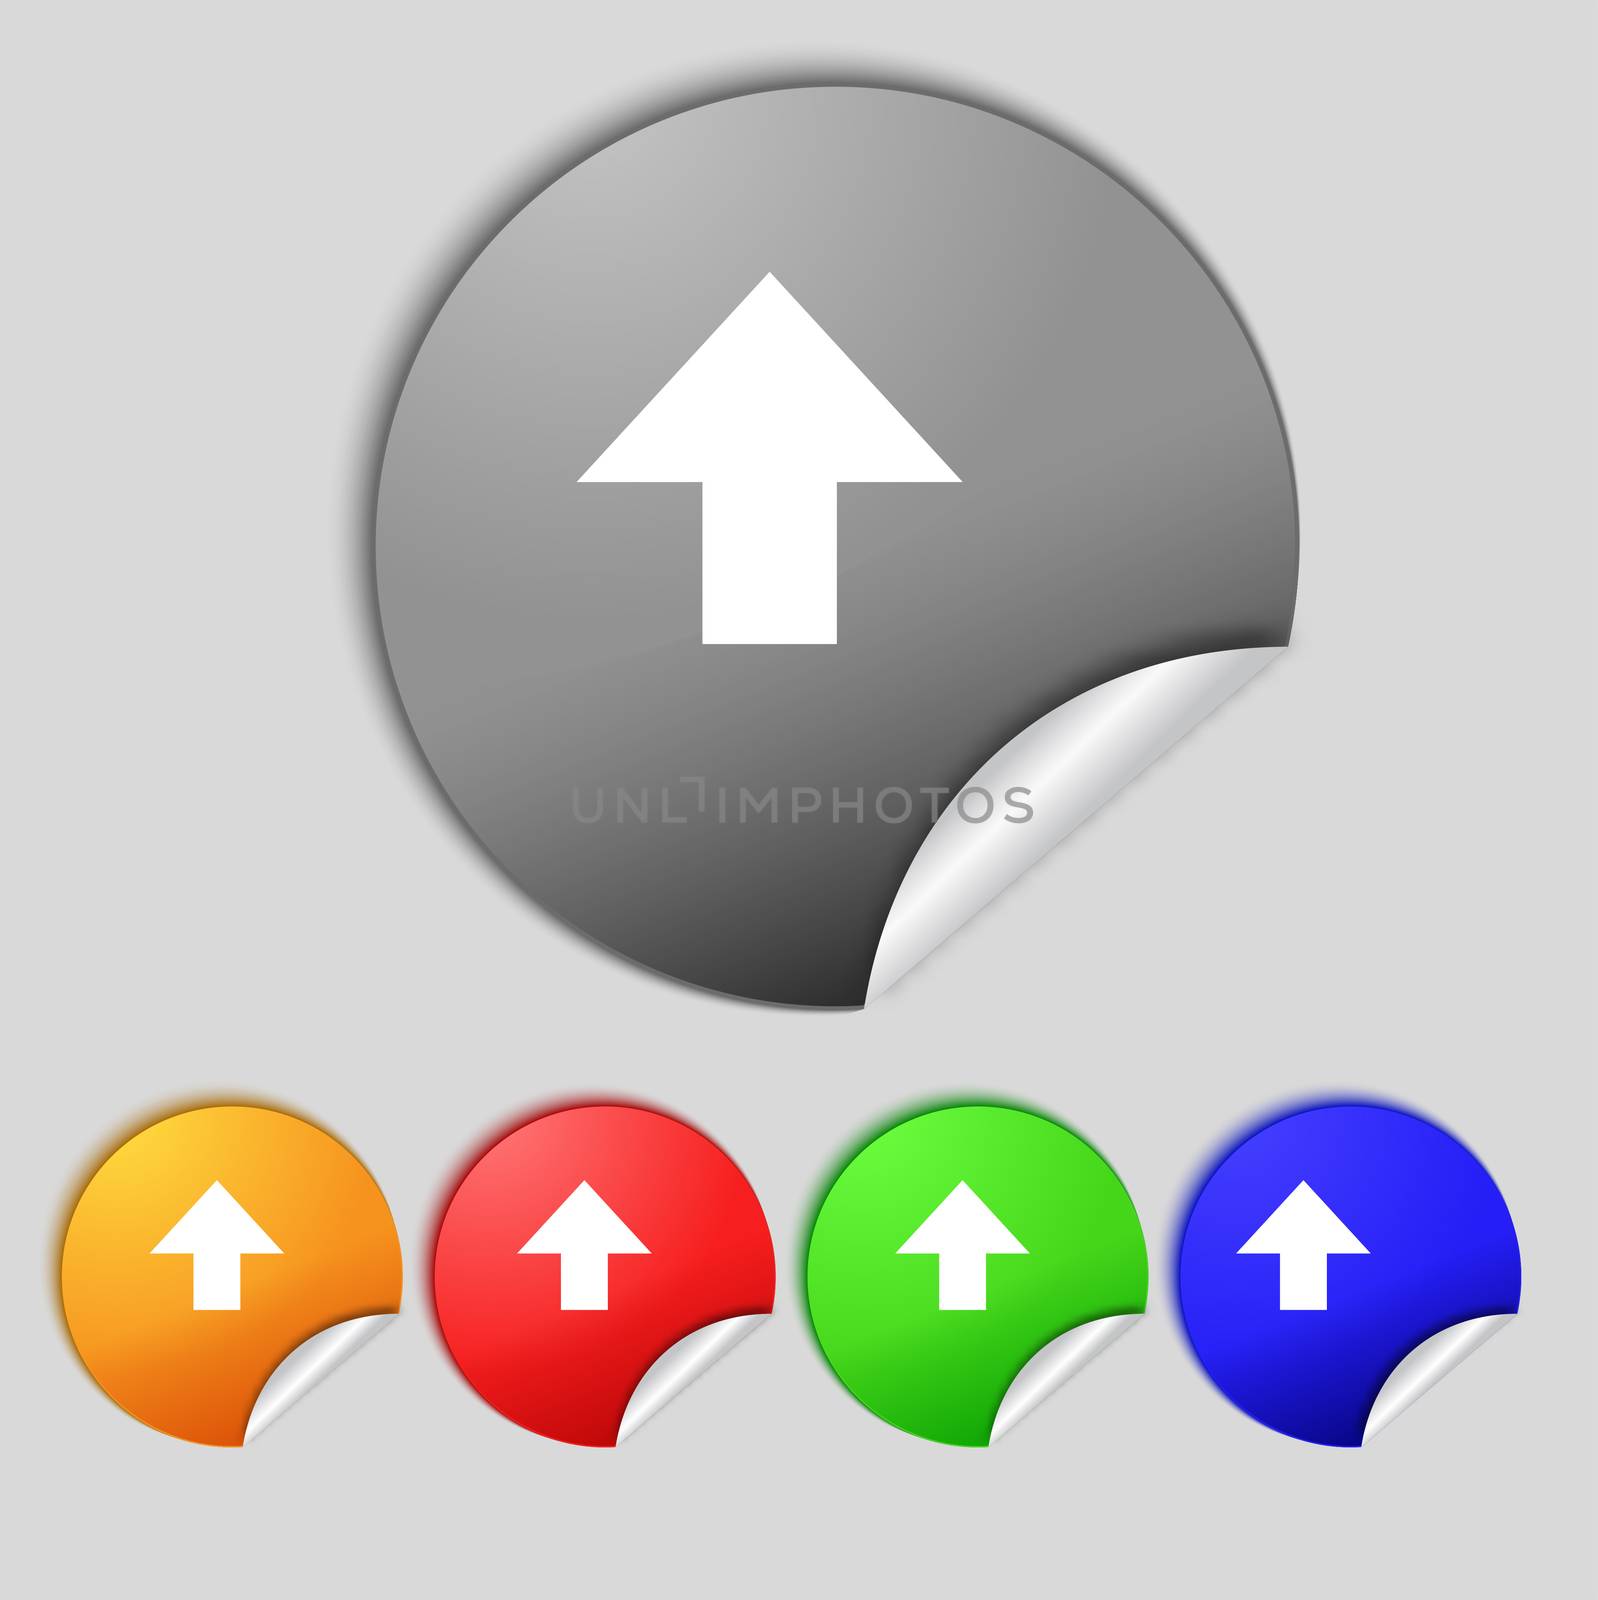 This side up sign icon. Fragile package symbol. Set colourful buttons. illustration